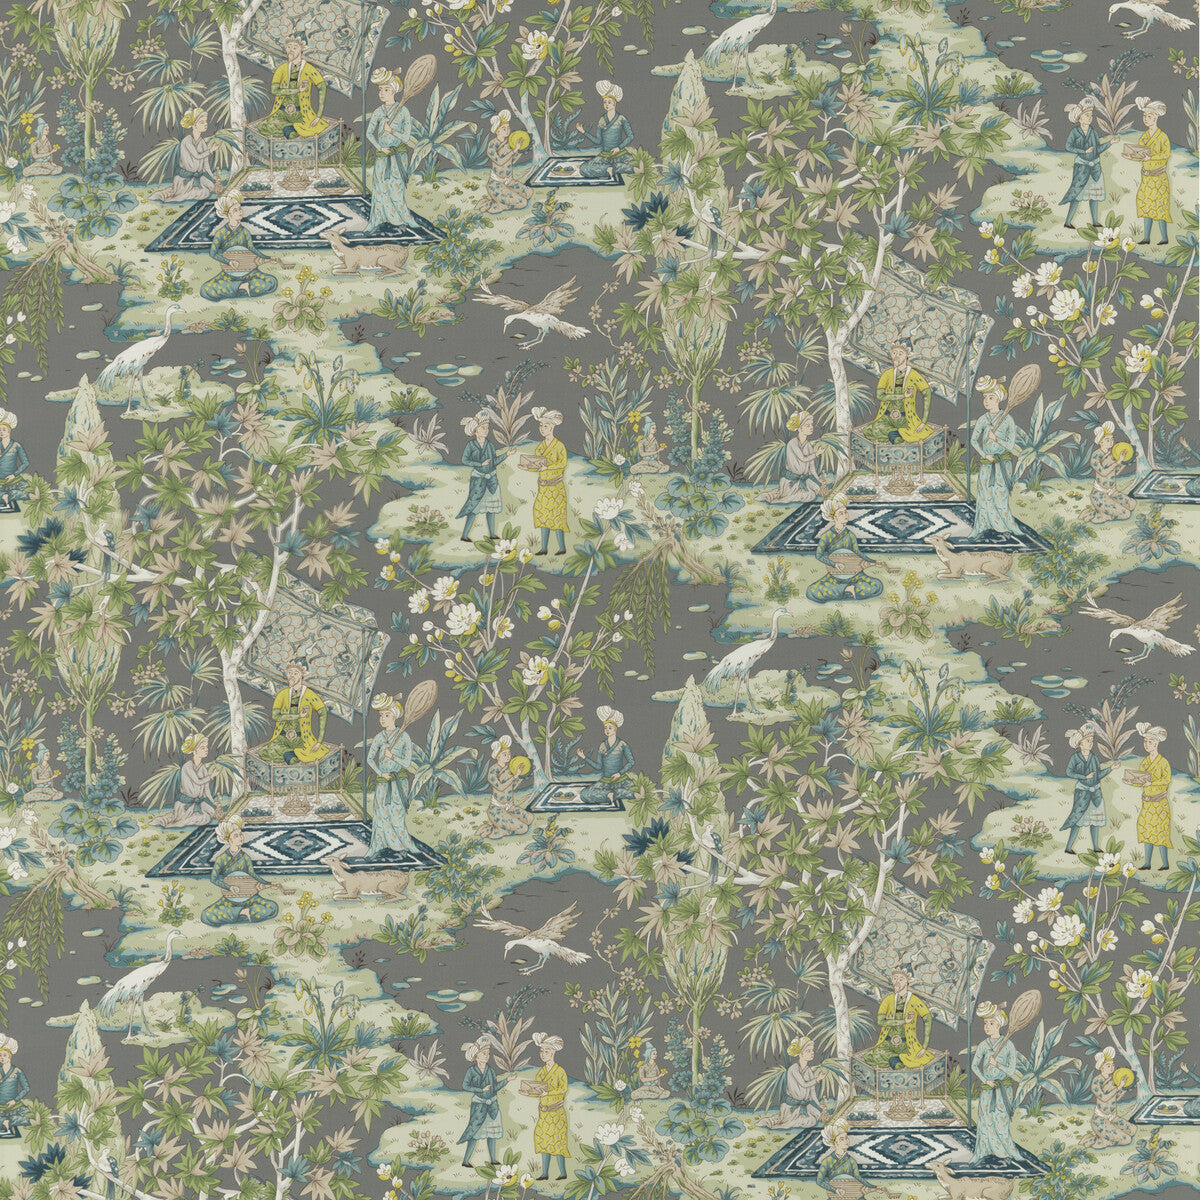 Lodi Garden Print fabric in grey color - pattern 8018119.113.0 - by Brunschwig &amp; Fils in the Baret collection